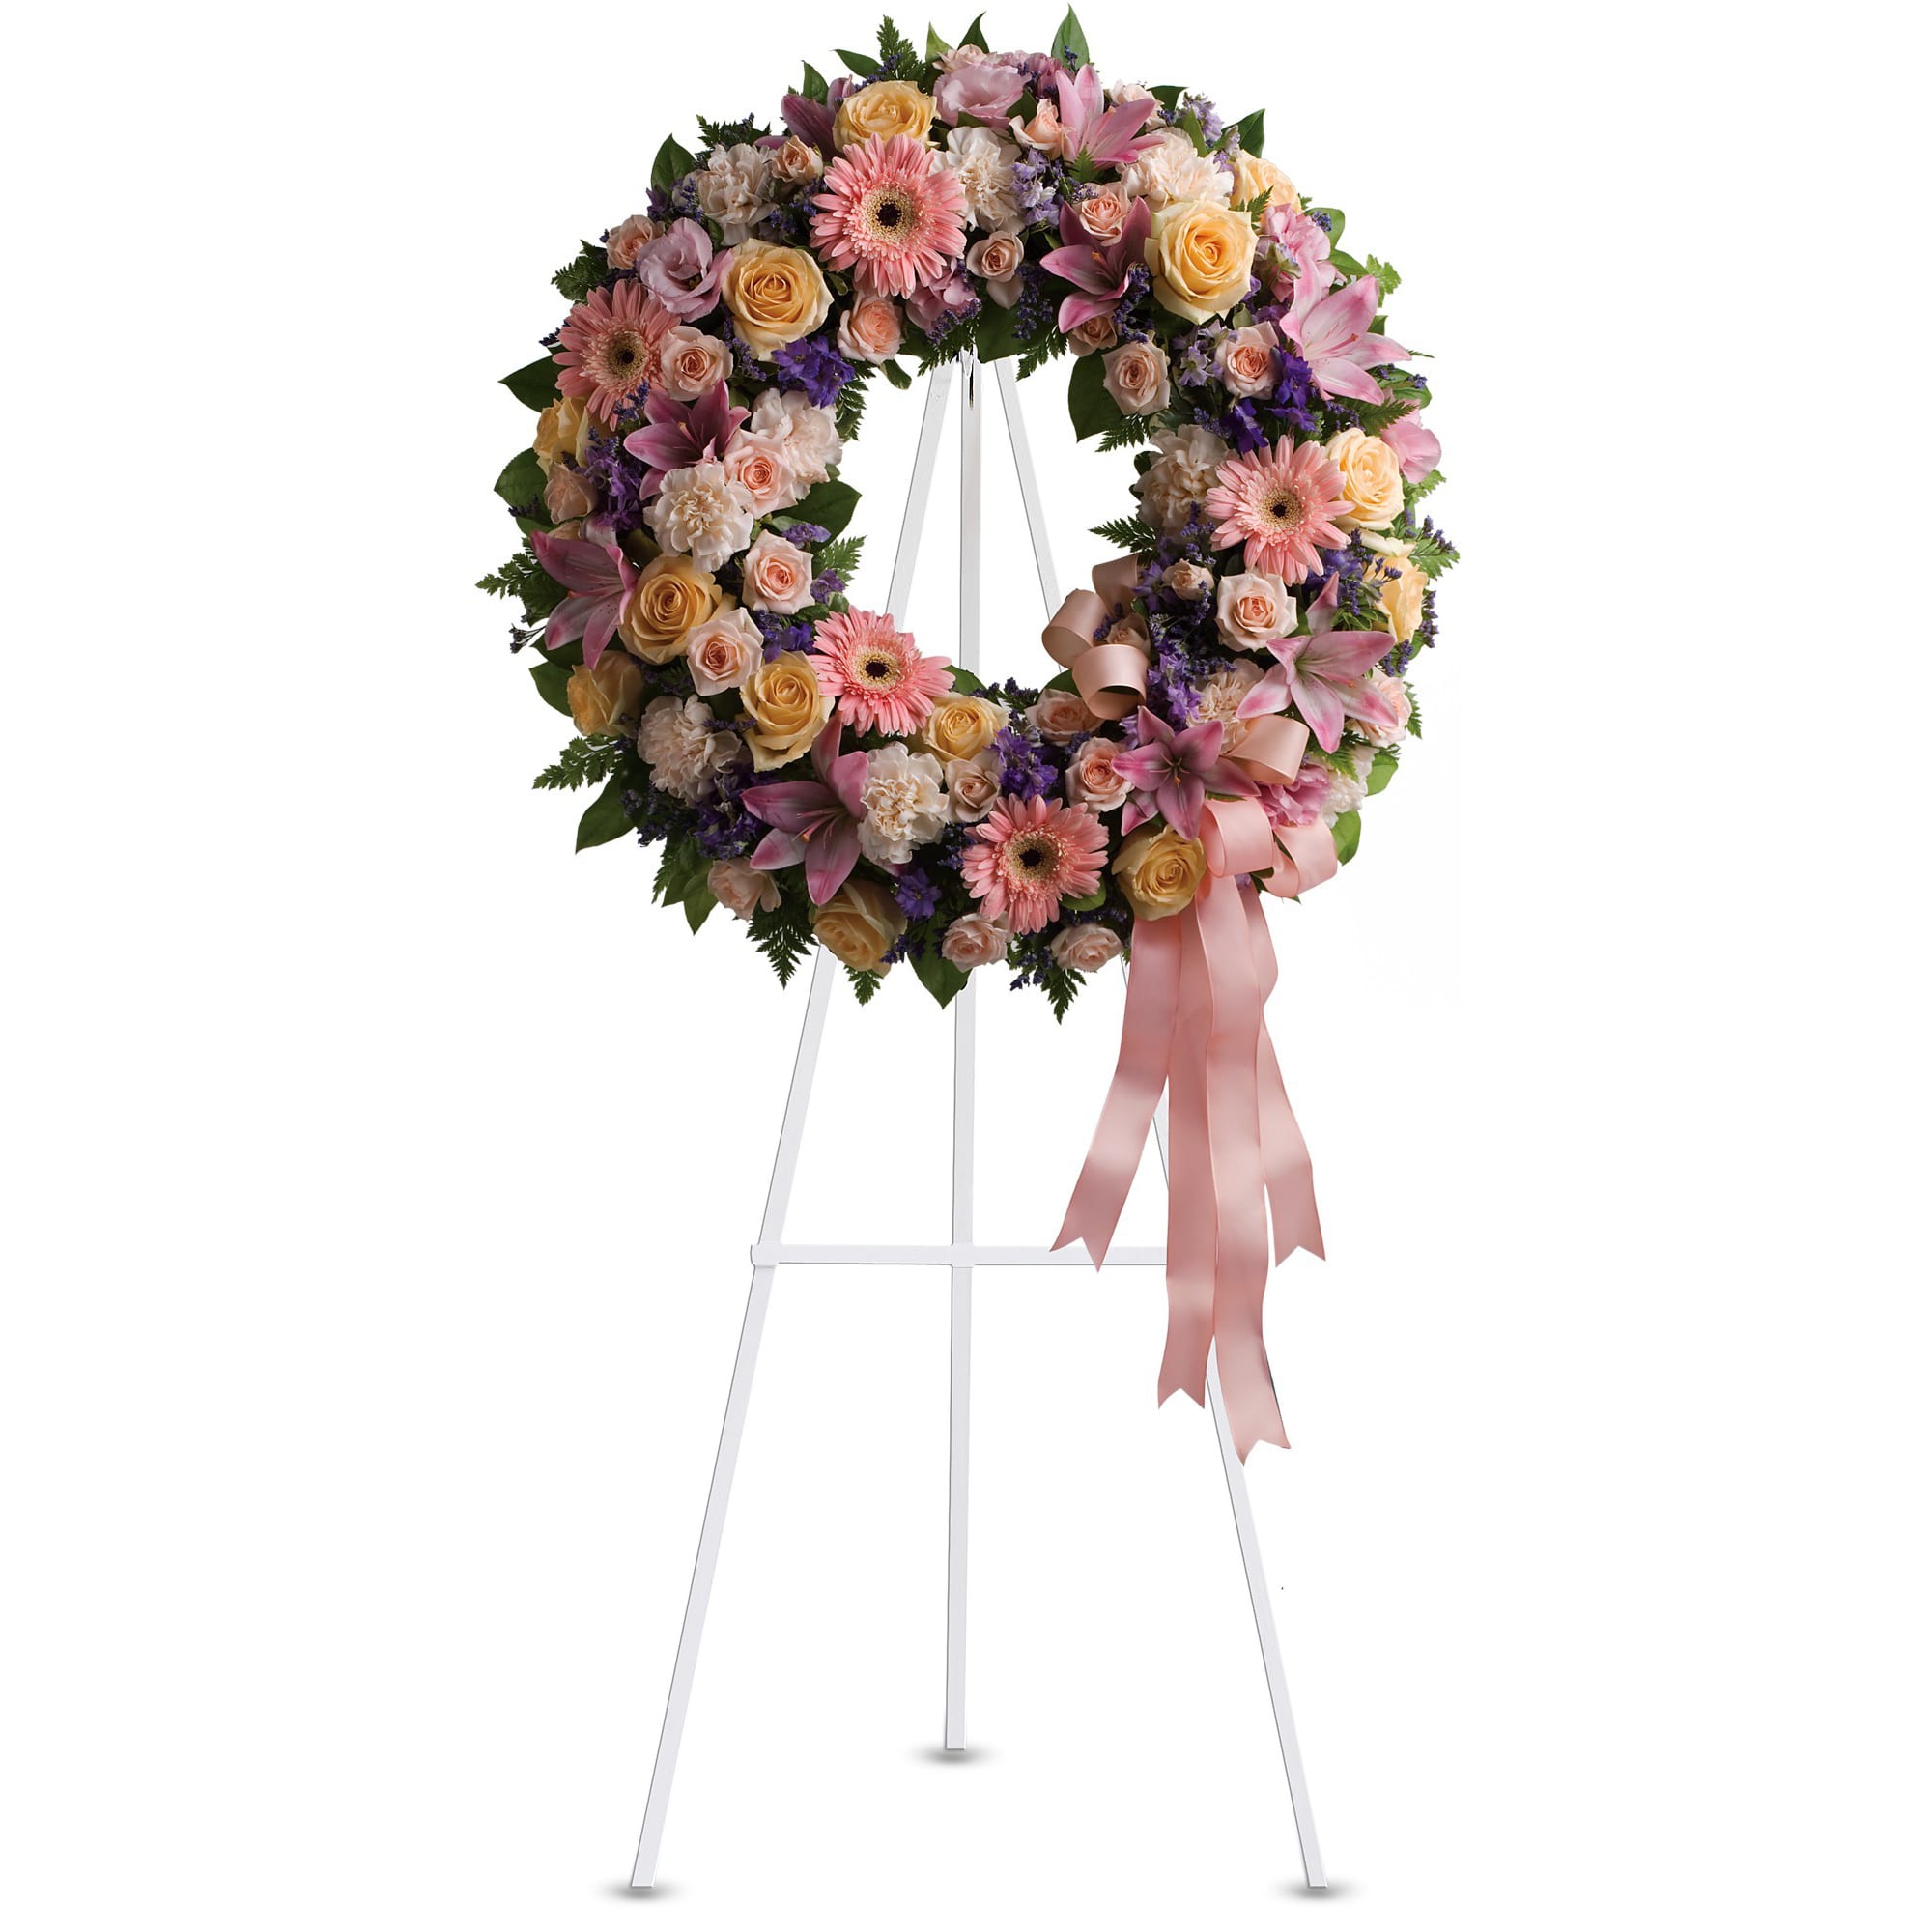 Graceful Garden Wreath - Family and friends will recollect how special their loved one was with this gentle and timeless circle of fragrant blooms to celebrate sweet memories. 